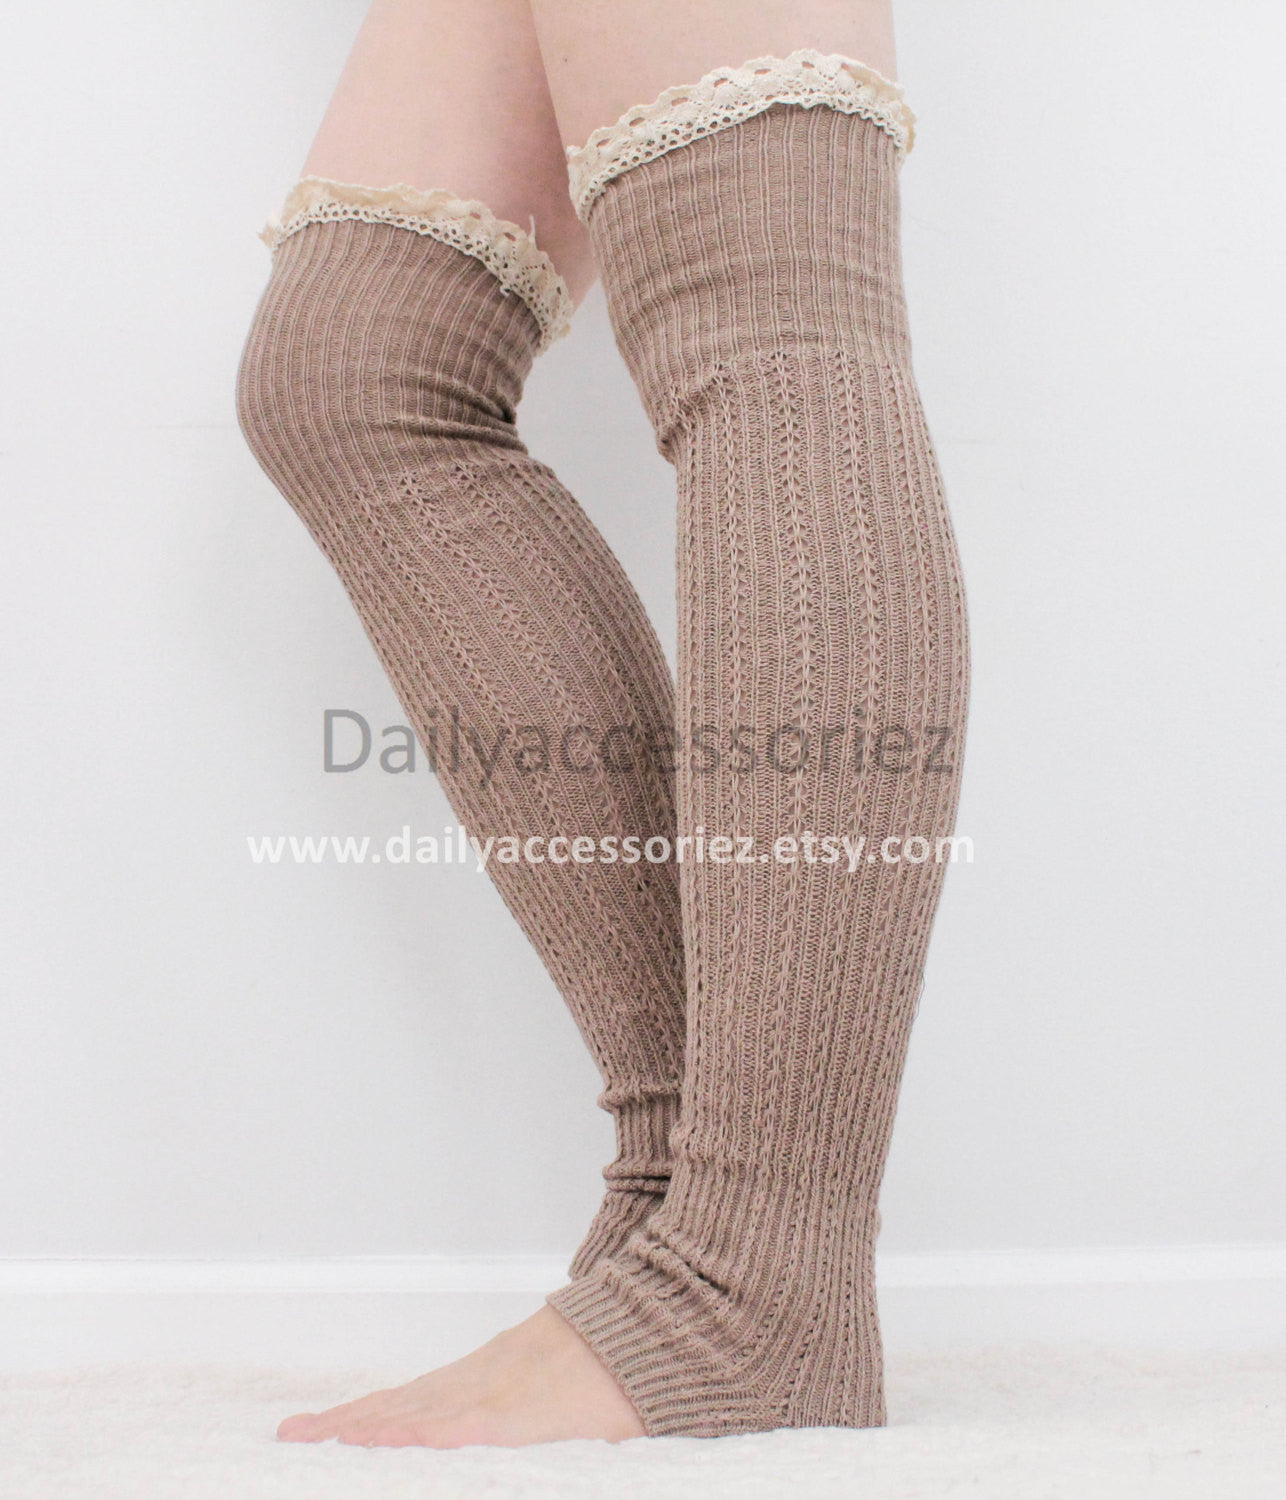 lace womens leg warmers - Bean Concept - Etsy